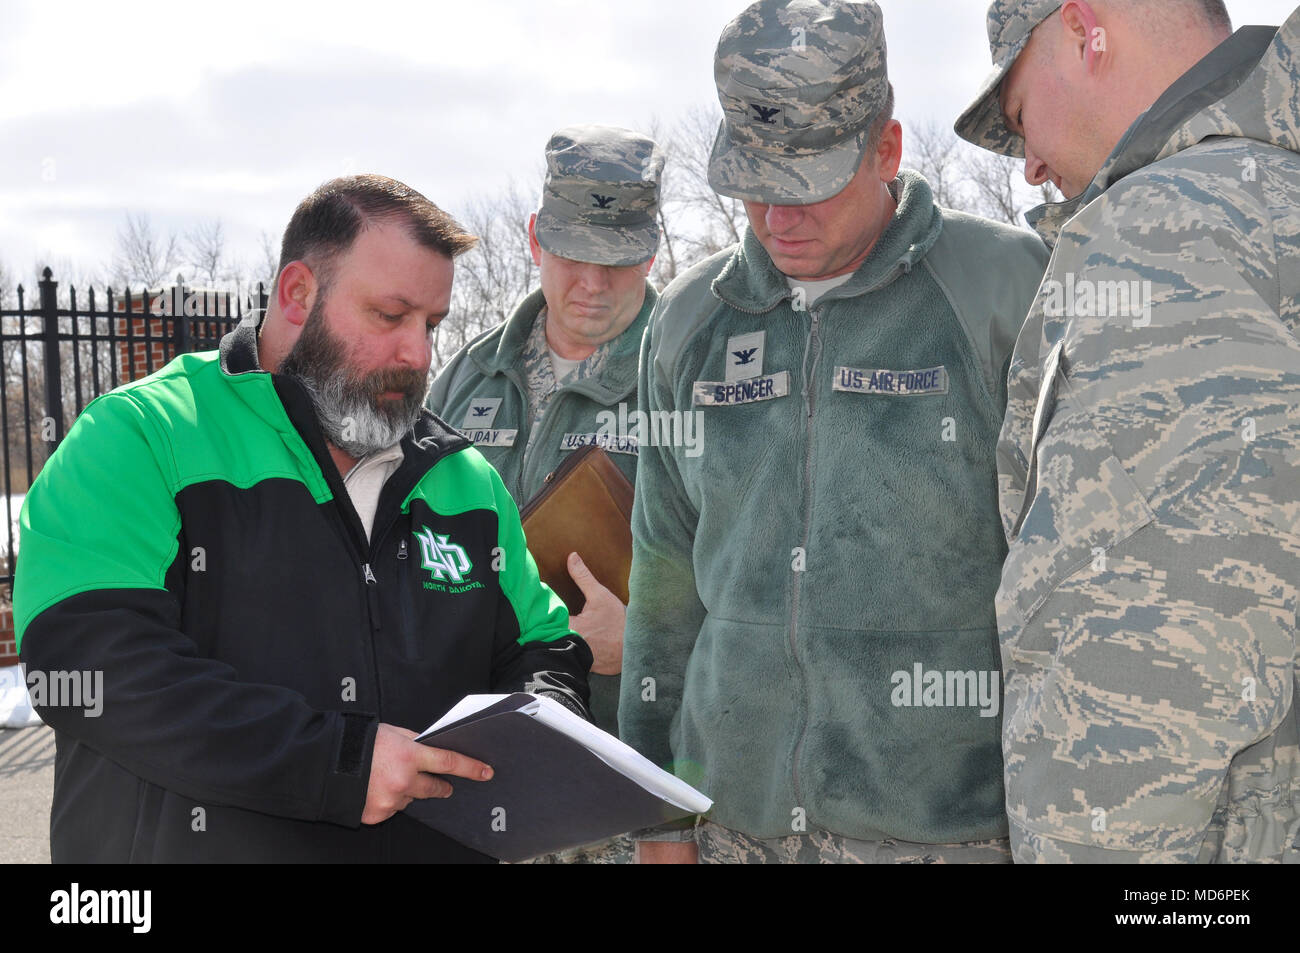 Jason Perkins, 319th Security Forces Squadron anti-terrorism program  manager (left), reviews security upgrade information with 319th Air Base  Wing leaders March 28, 2018, on Grand Forks Air Force Base, N.D. Recent  unauthorized